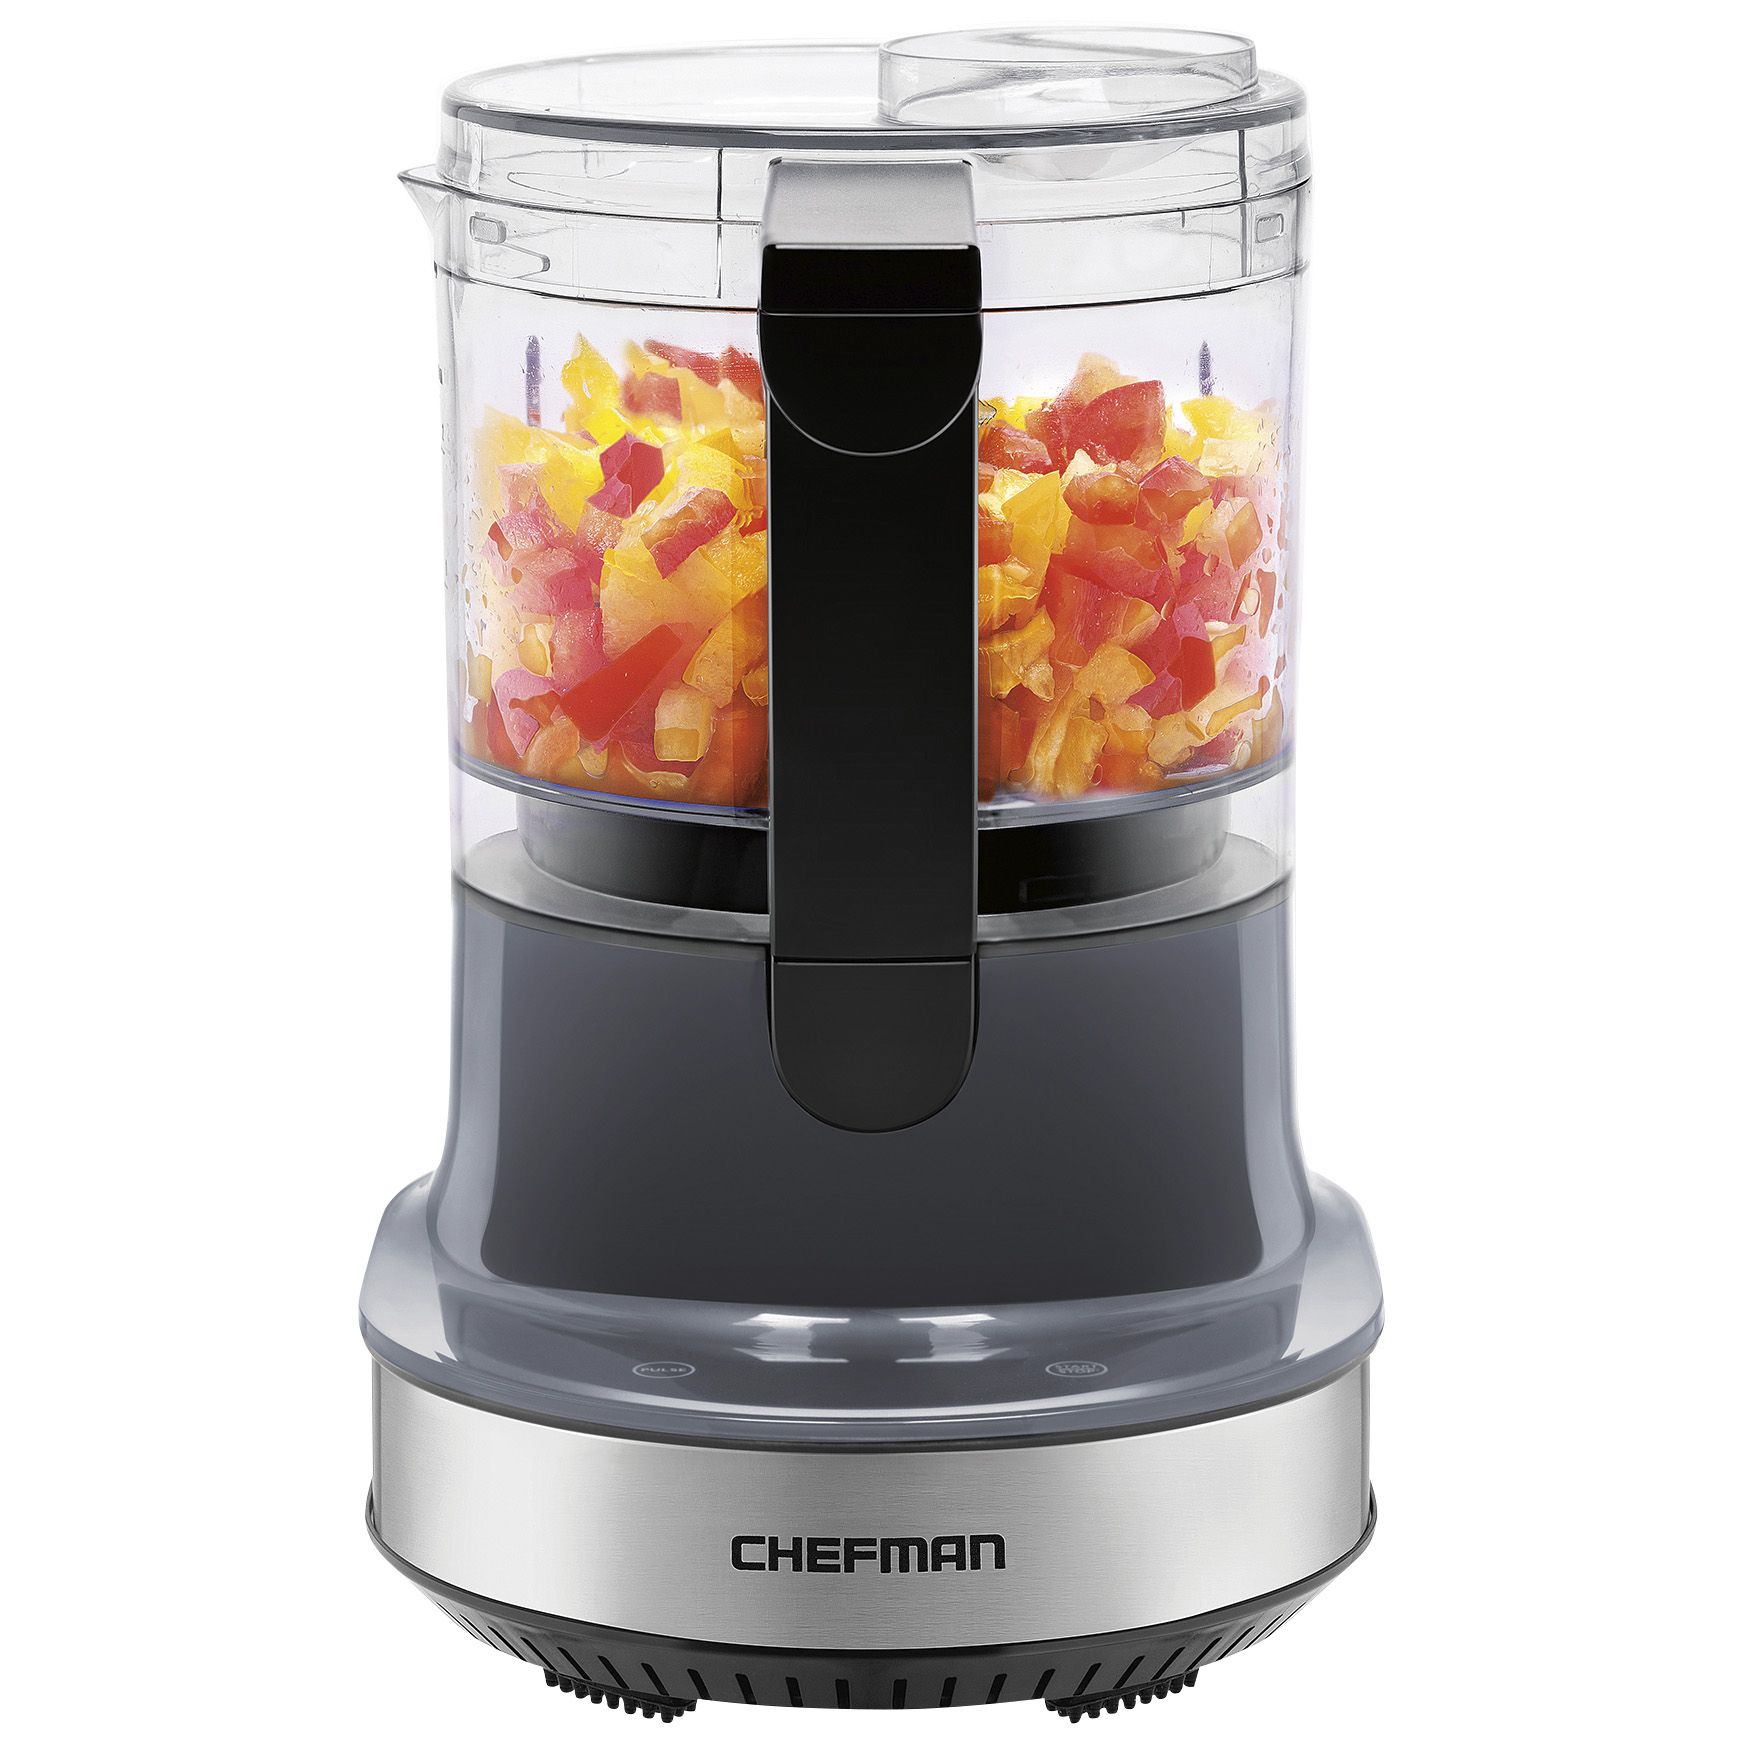 Chefman Electric Food Processor, Stainless Steel, 4 Cups, Grey 